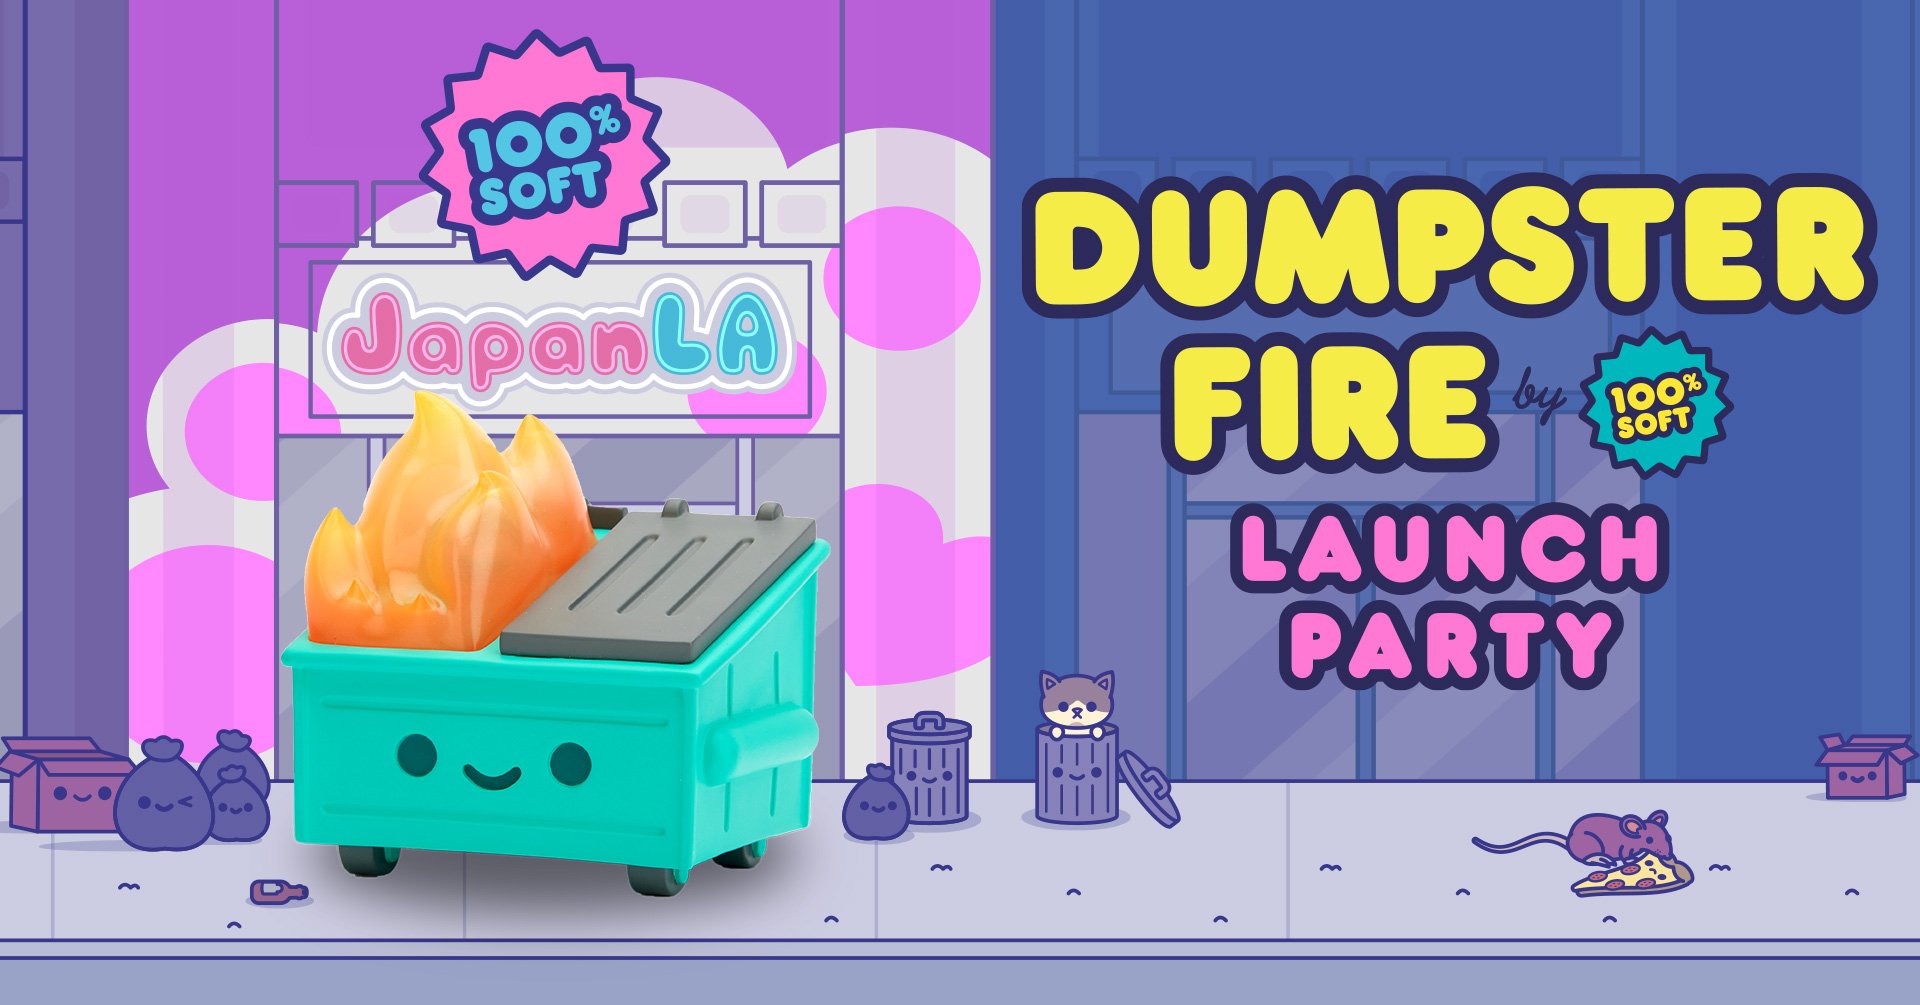 "Dumpster Fire by 100% Soft Launch Party. 100% Soft at JapanLA"